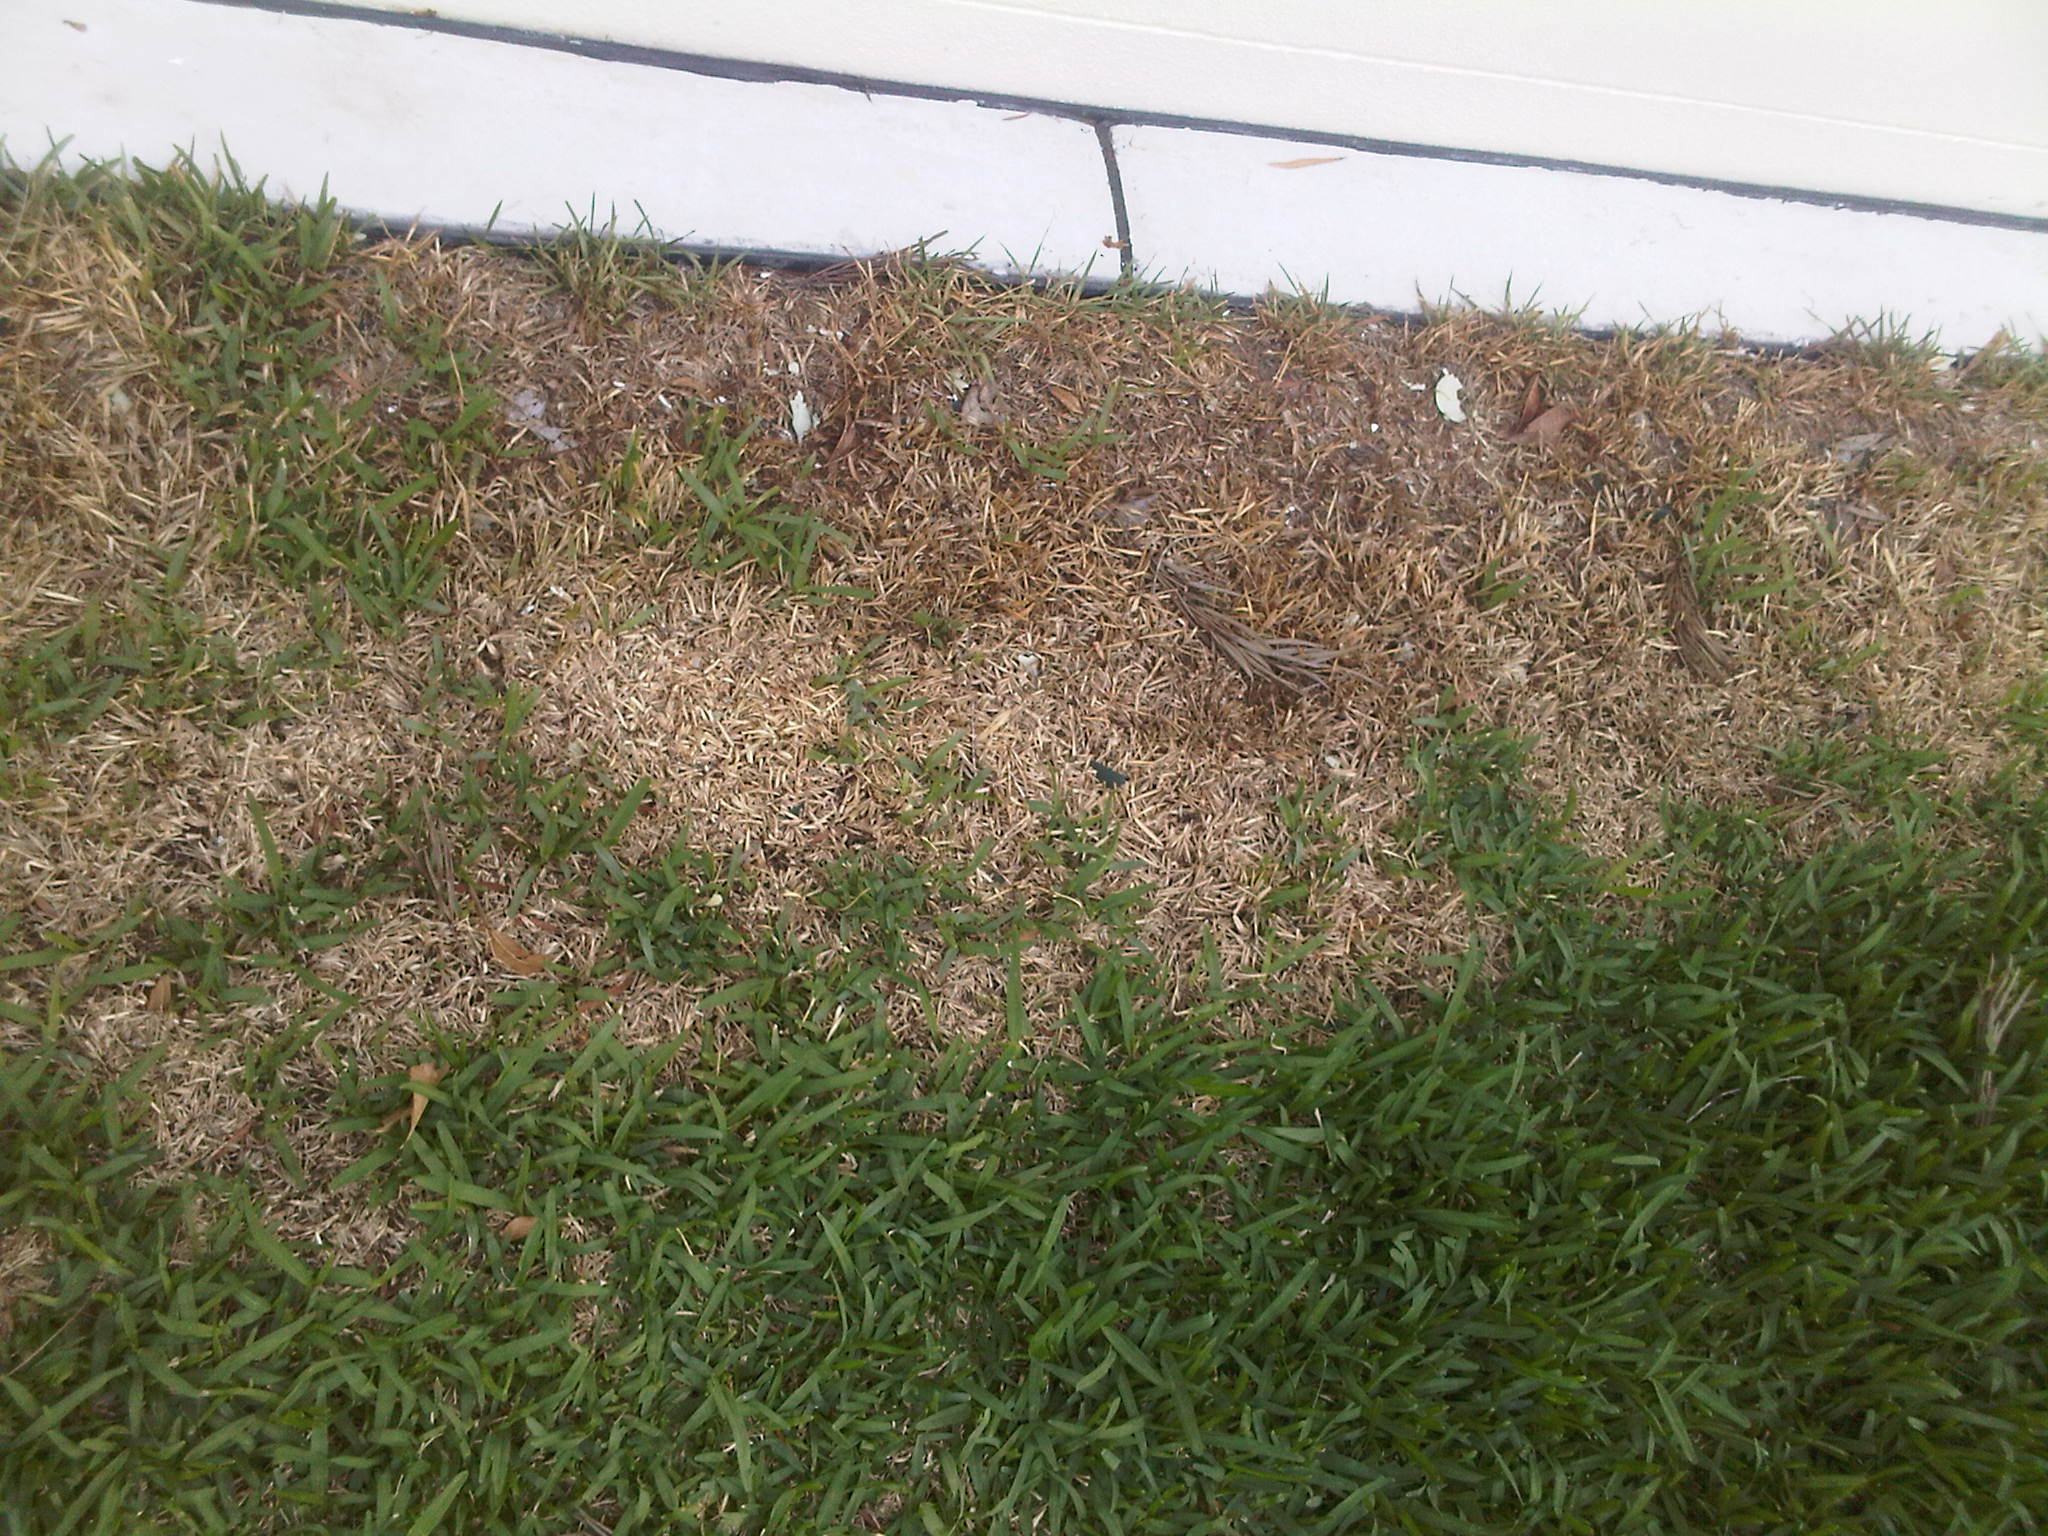 Grub Infested Patchy Lawn